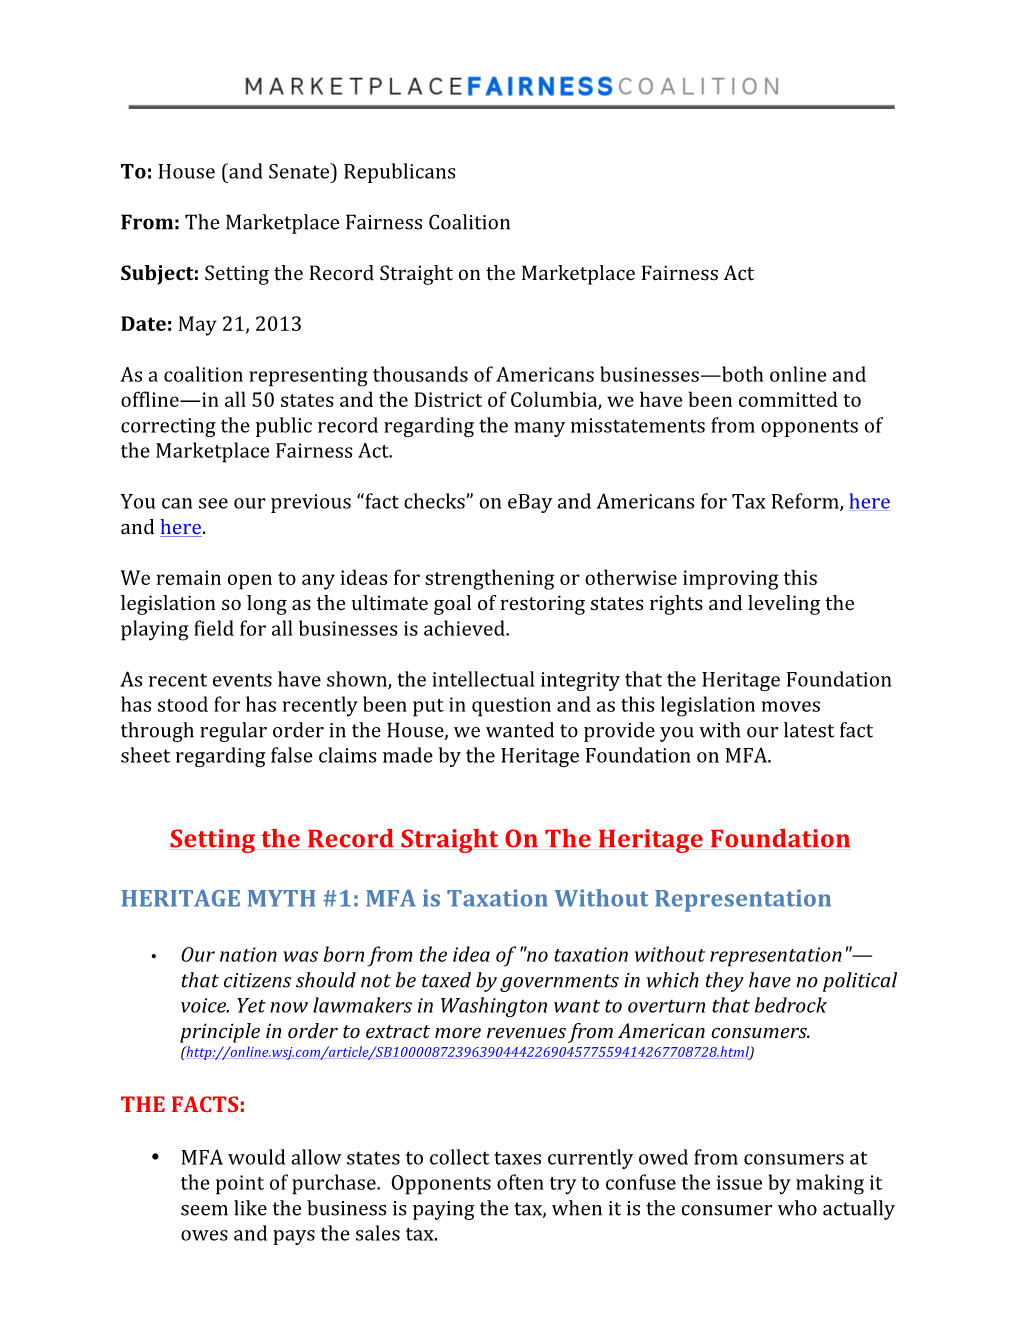 Setting the Record Straight on the Heritage Foundation